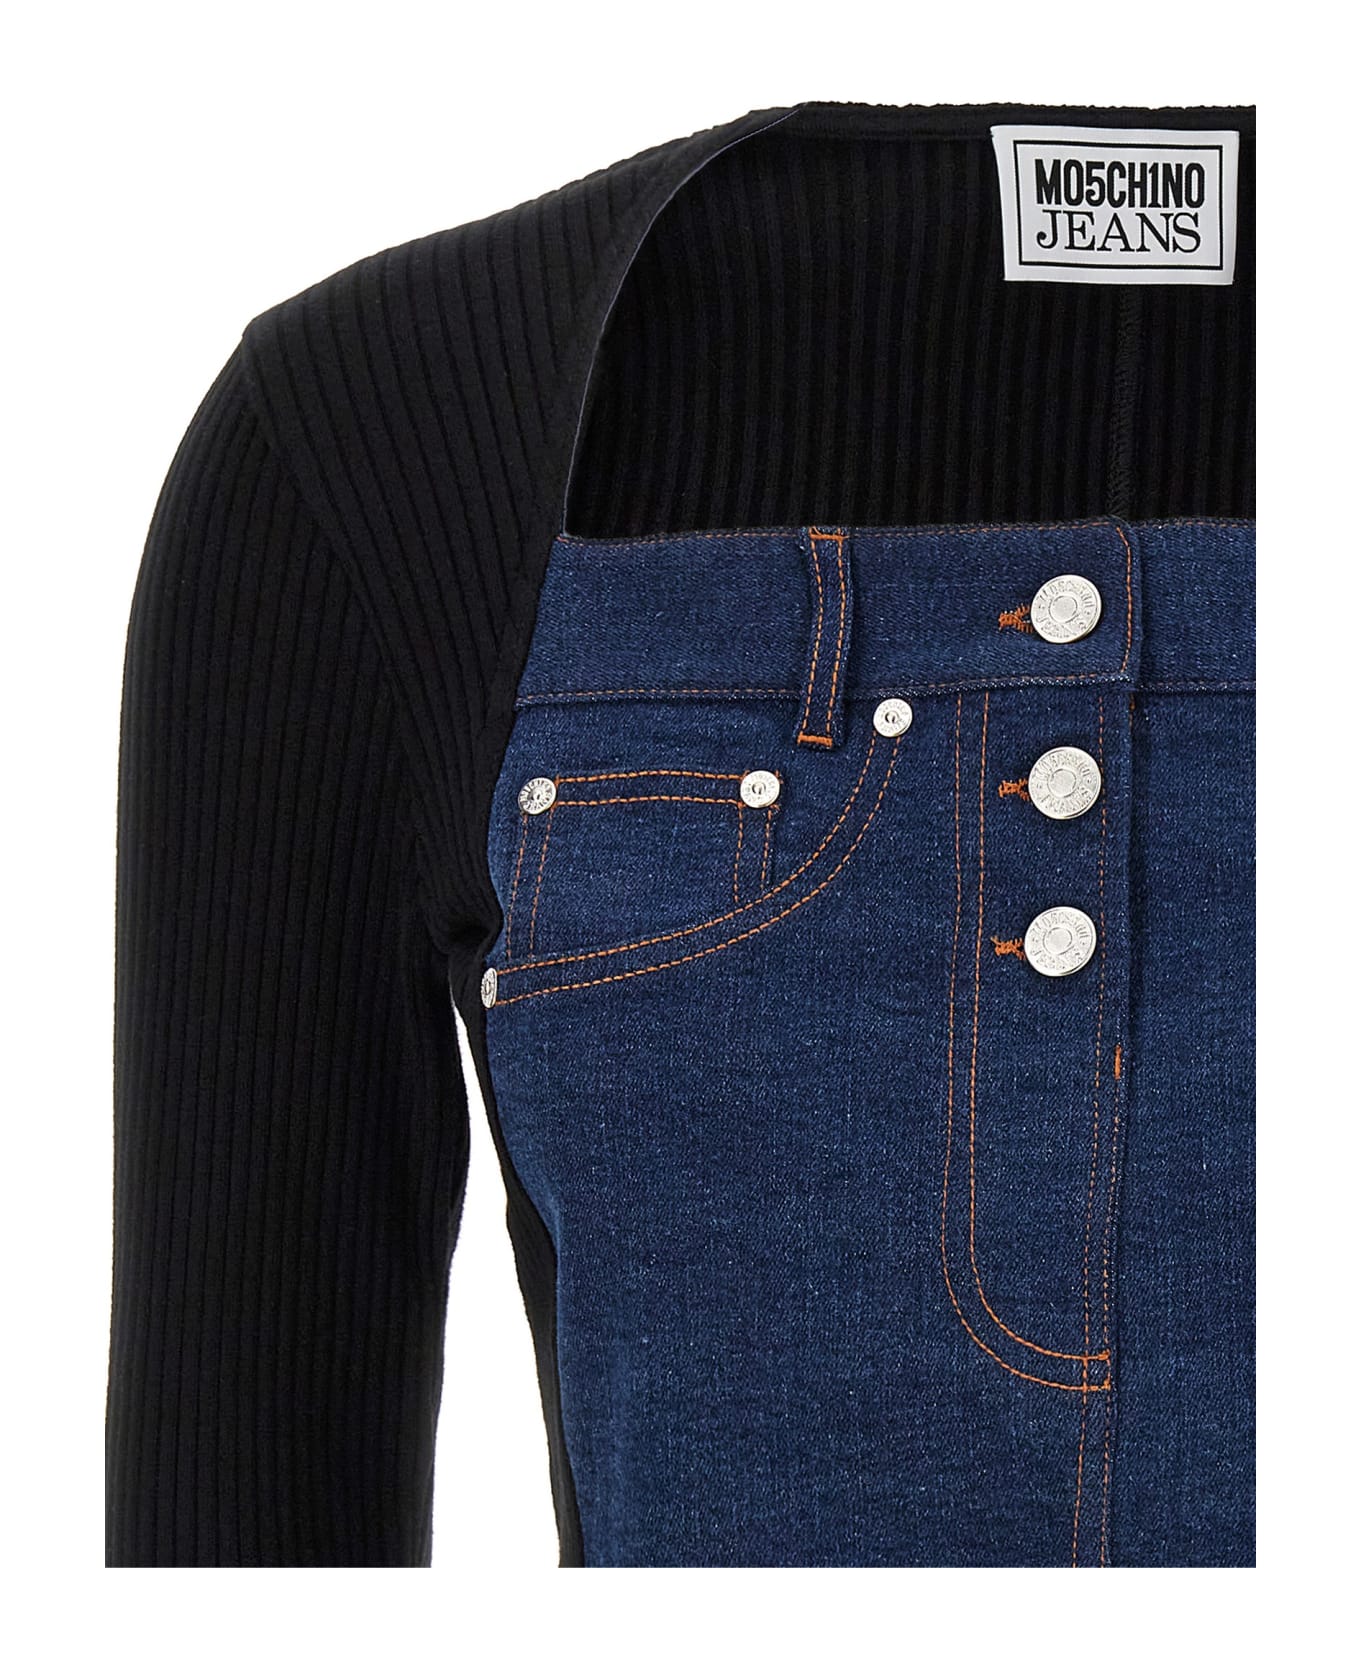 M05CH1N0 Jeans Denim Top And Ribbed Knit - BLACK/BLUE